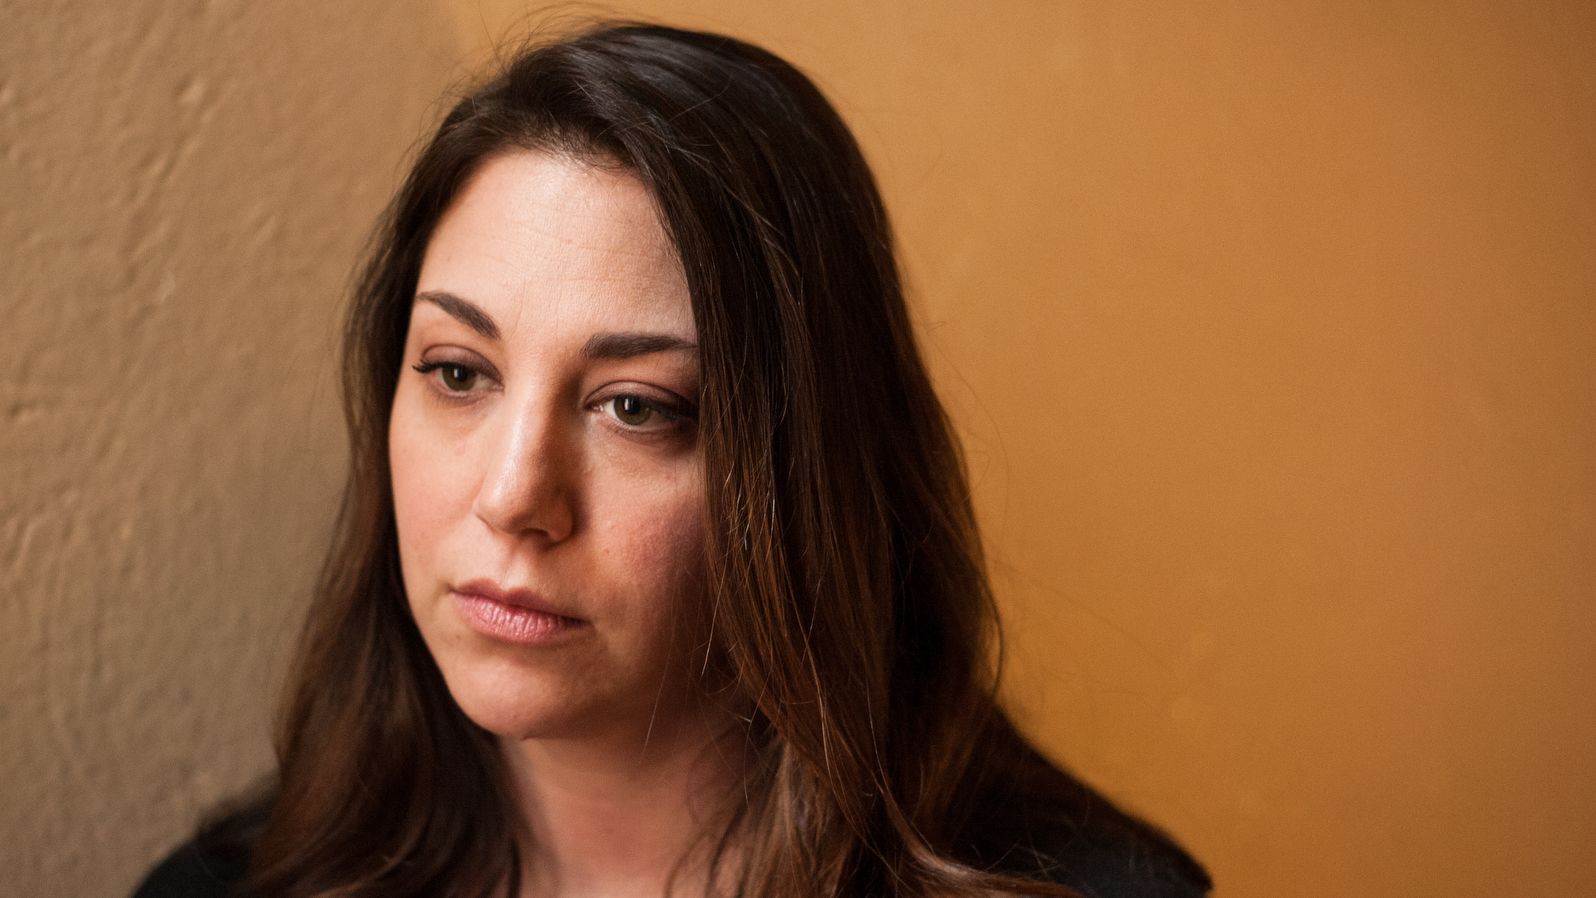 Samantha Shulman says her voice teacher exposed himself and groped her during a session.